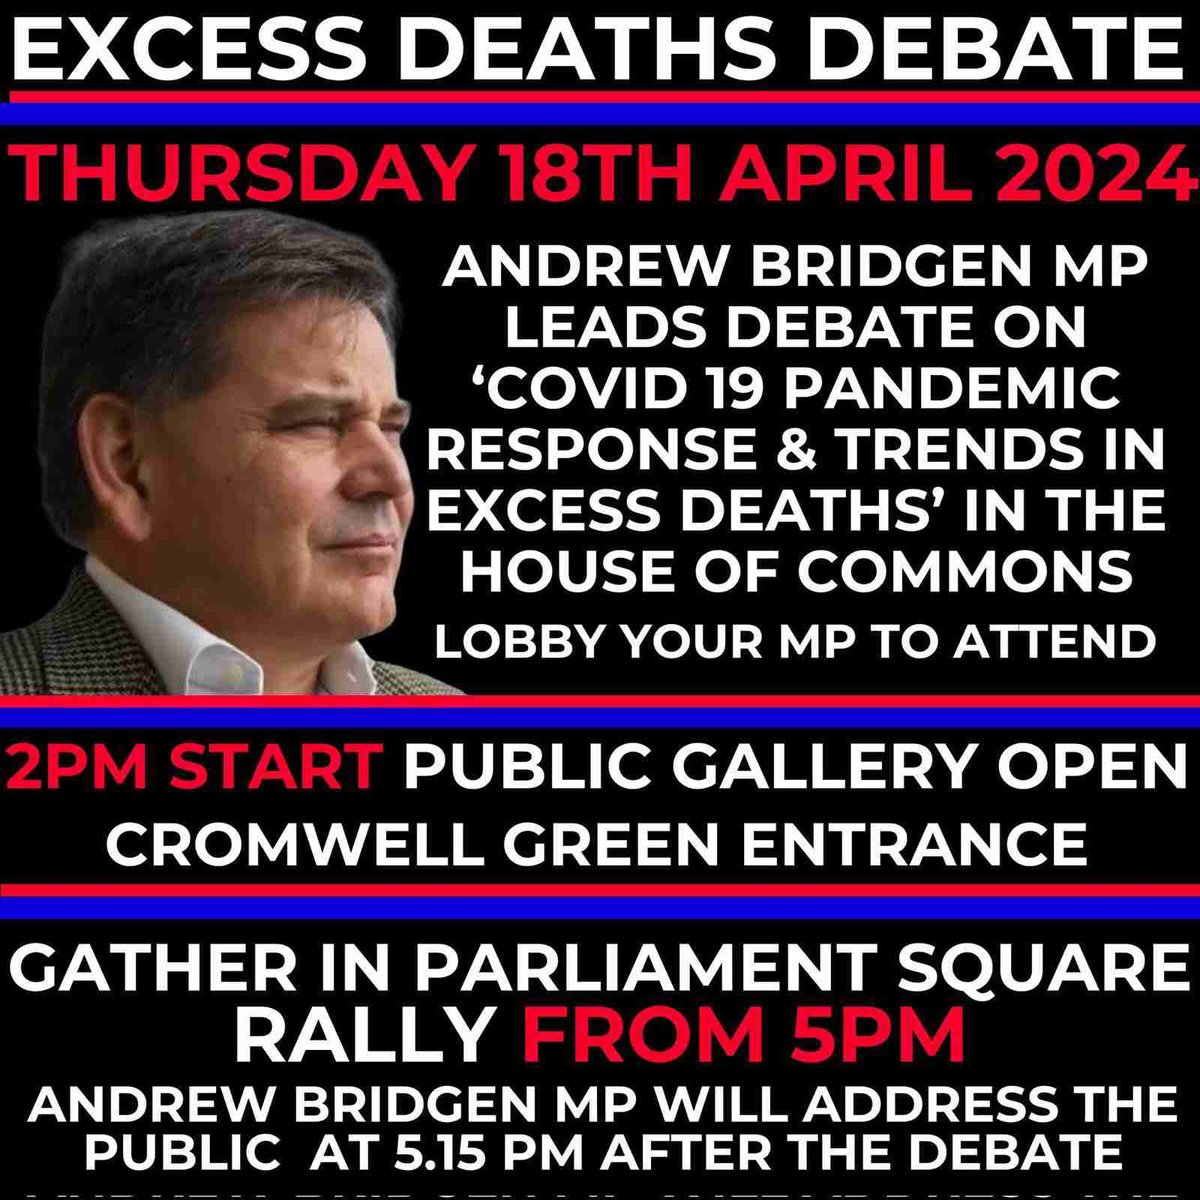 Today I wrote to my MP @JDjanogly asking them to attend Thursday's House of Commons debate on Excess Deaths in the UK and the Covid response   We must get to the bottom of this issue   @conservatives @uklabour @libdems @10downingstreet @abridgen @togetherdec